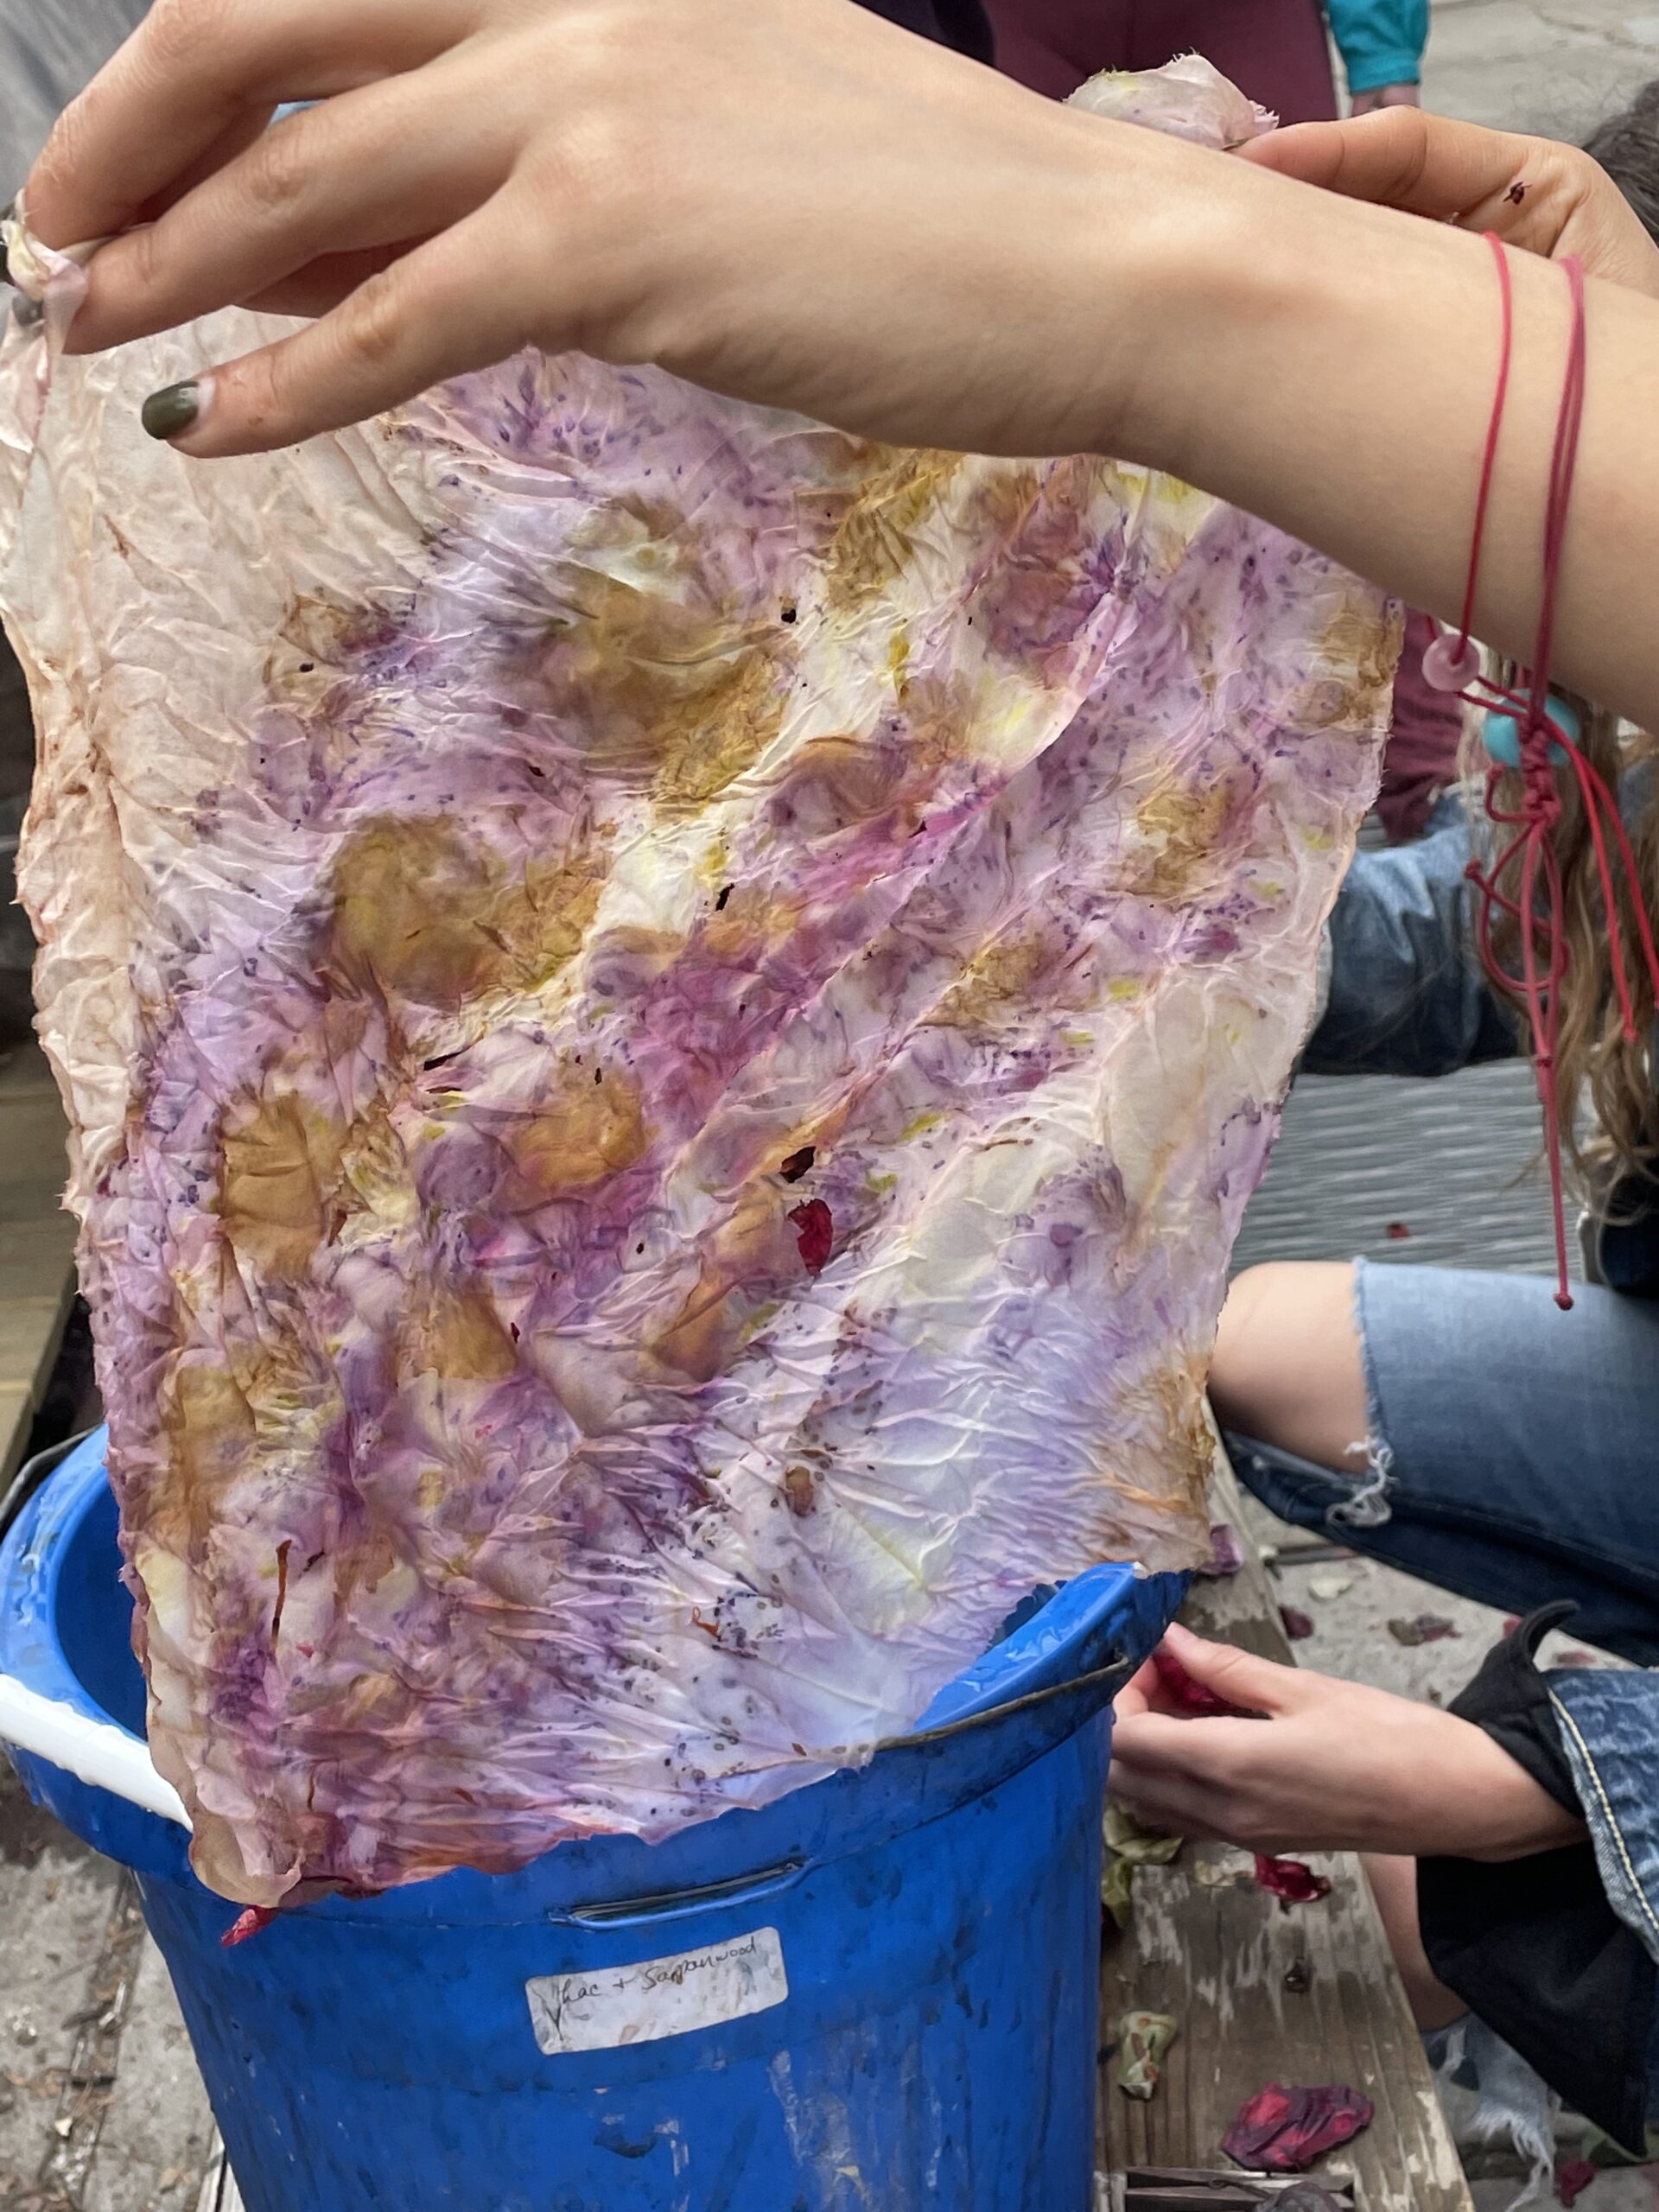 Two hands hold open a naturally dyed textile smeared with ochres and lavender coloring.